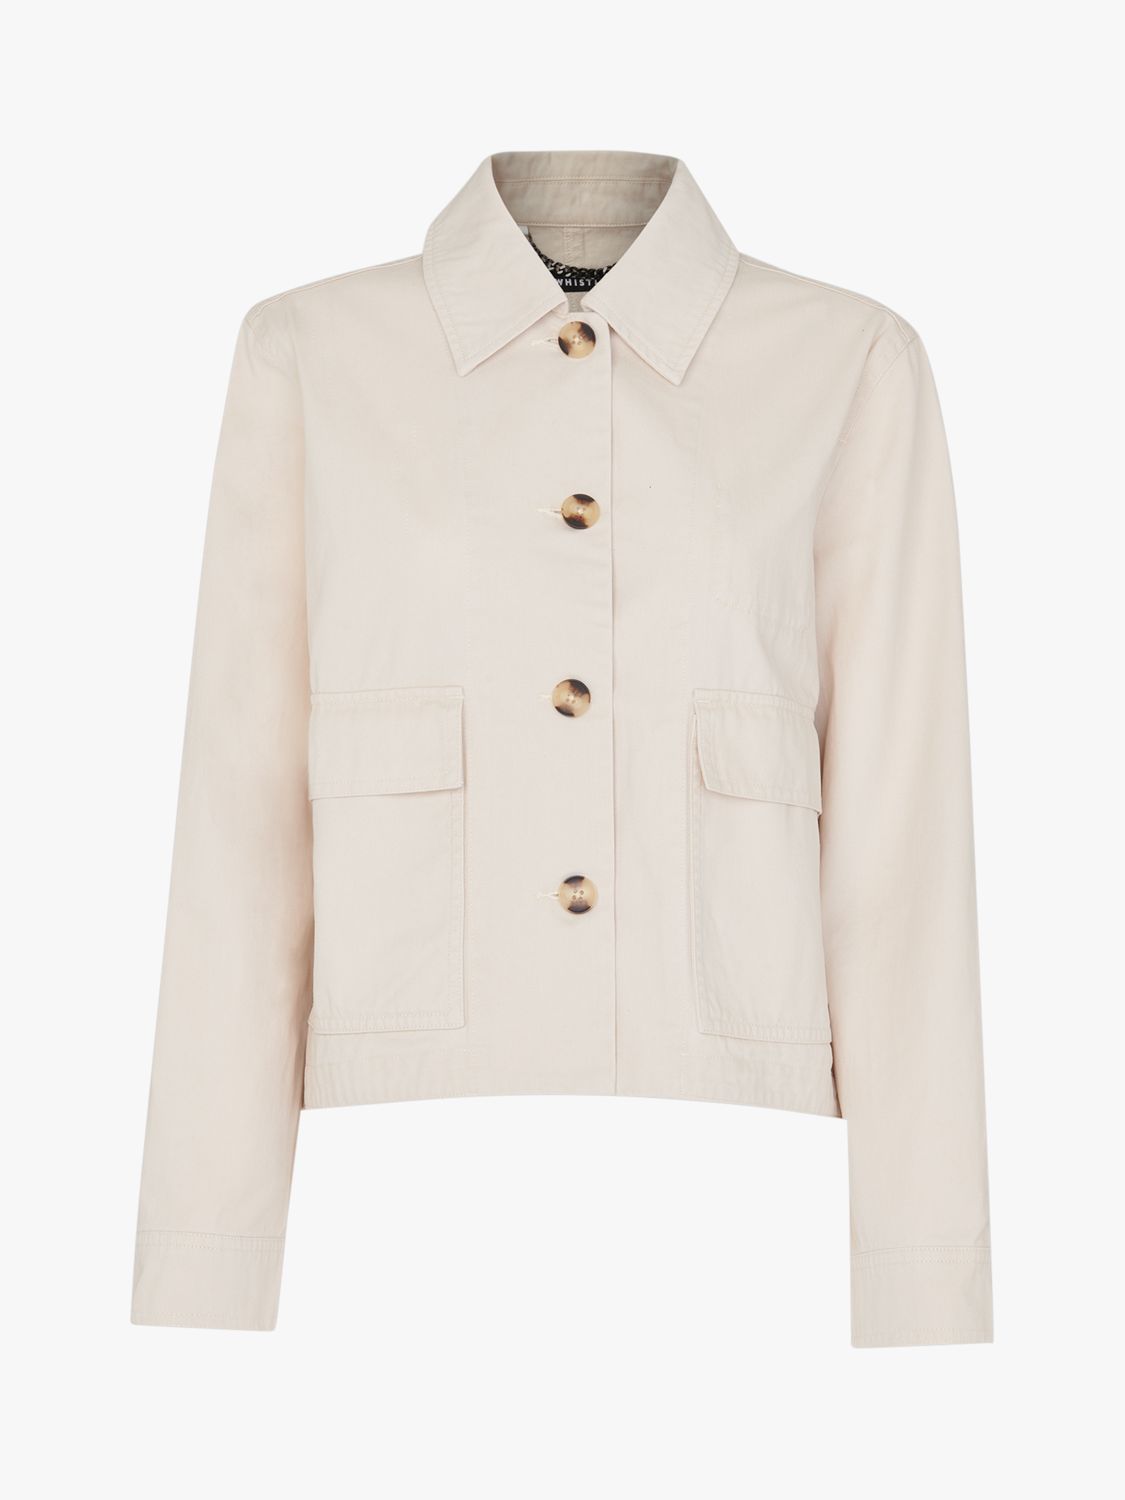 Whistles Marie Casual Cotton Jacket, Stone at John Lewis & Partners